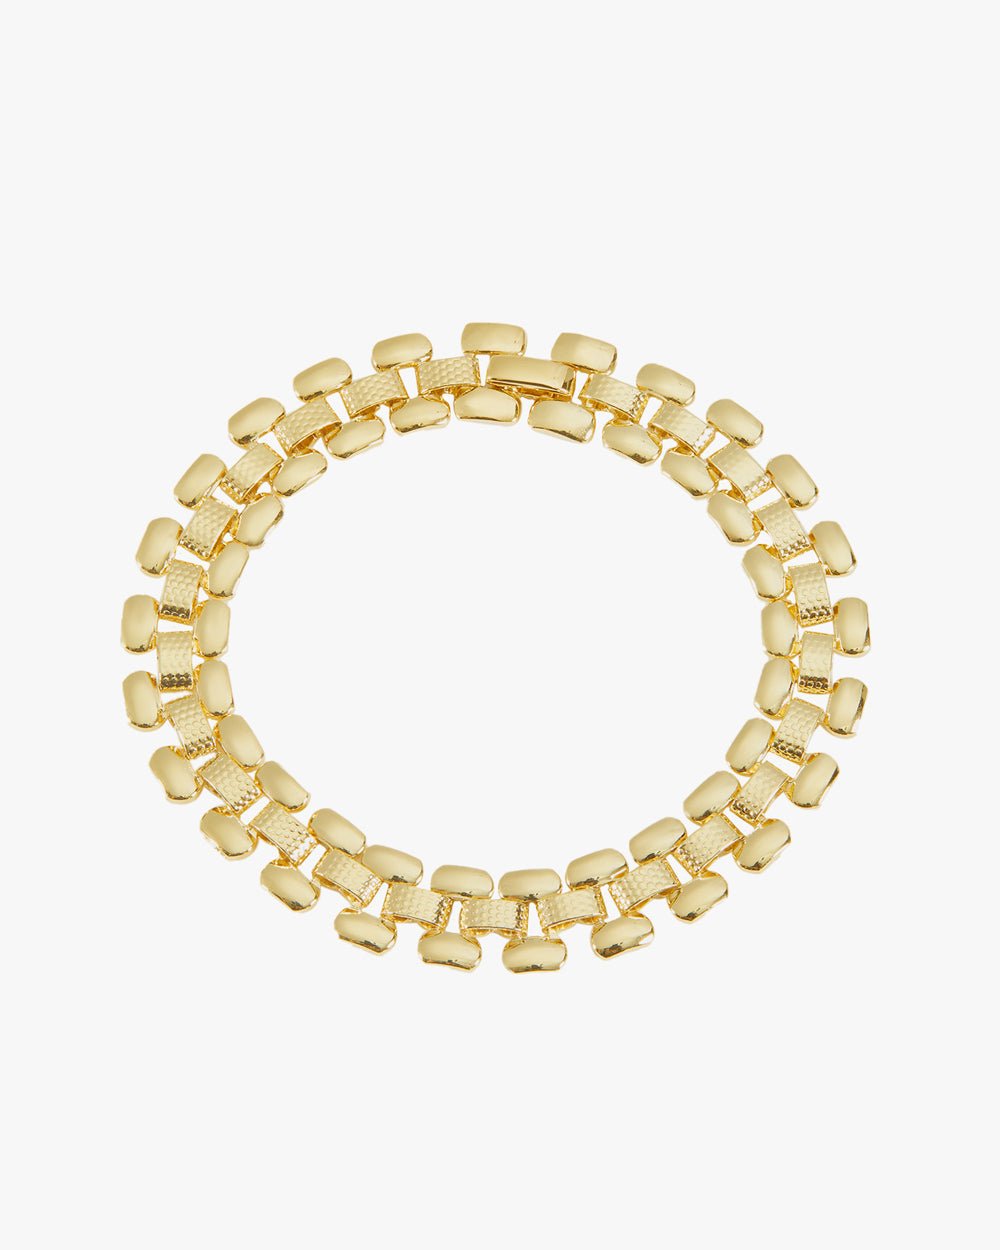 JULES GOLD WATCHBAND BRACELET - Shop Cupcakes and Cashmere